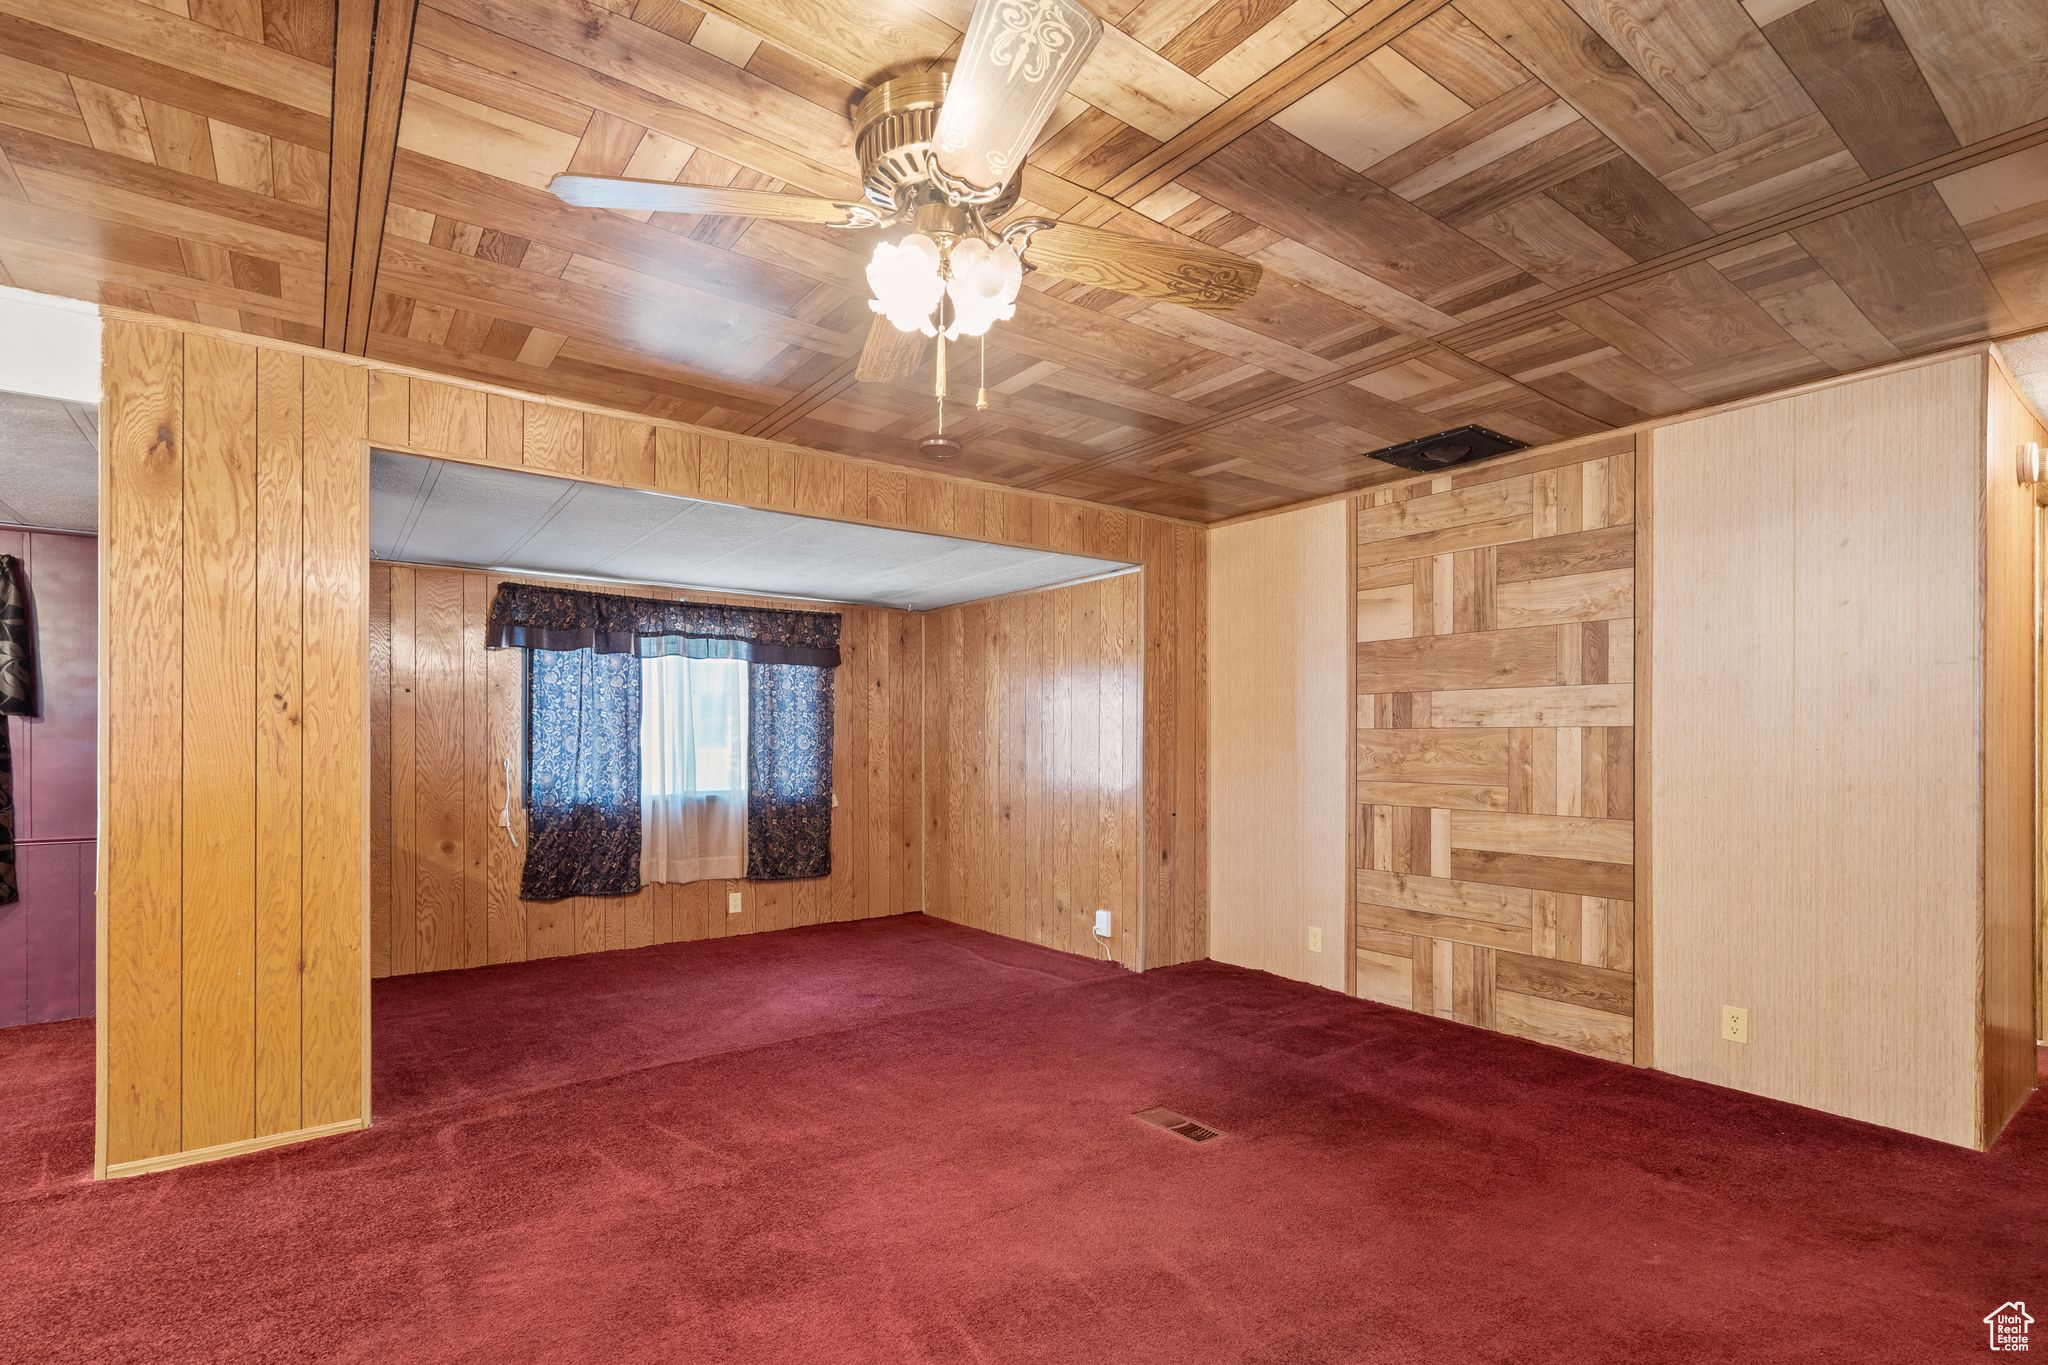 Empty room featuring wooden ceiling, dark colored carpet, wood walls, and ceiling fan